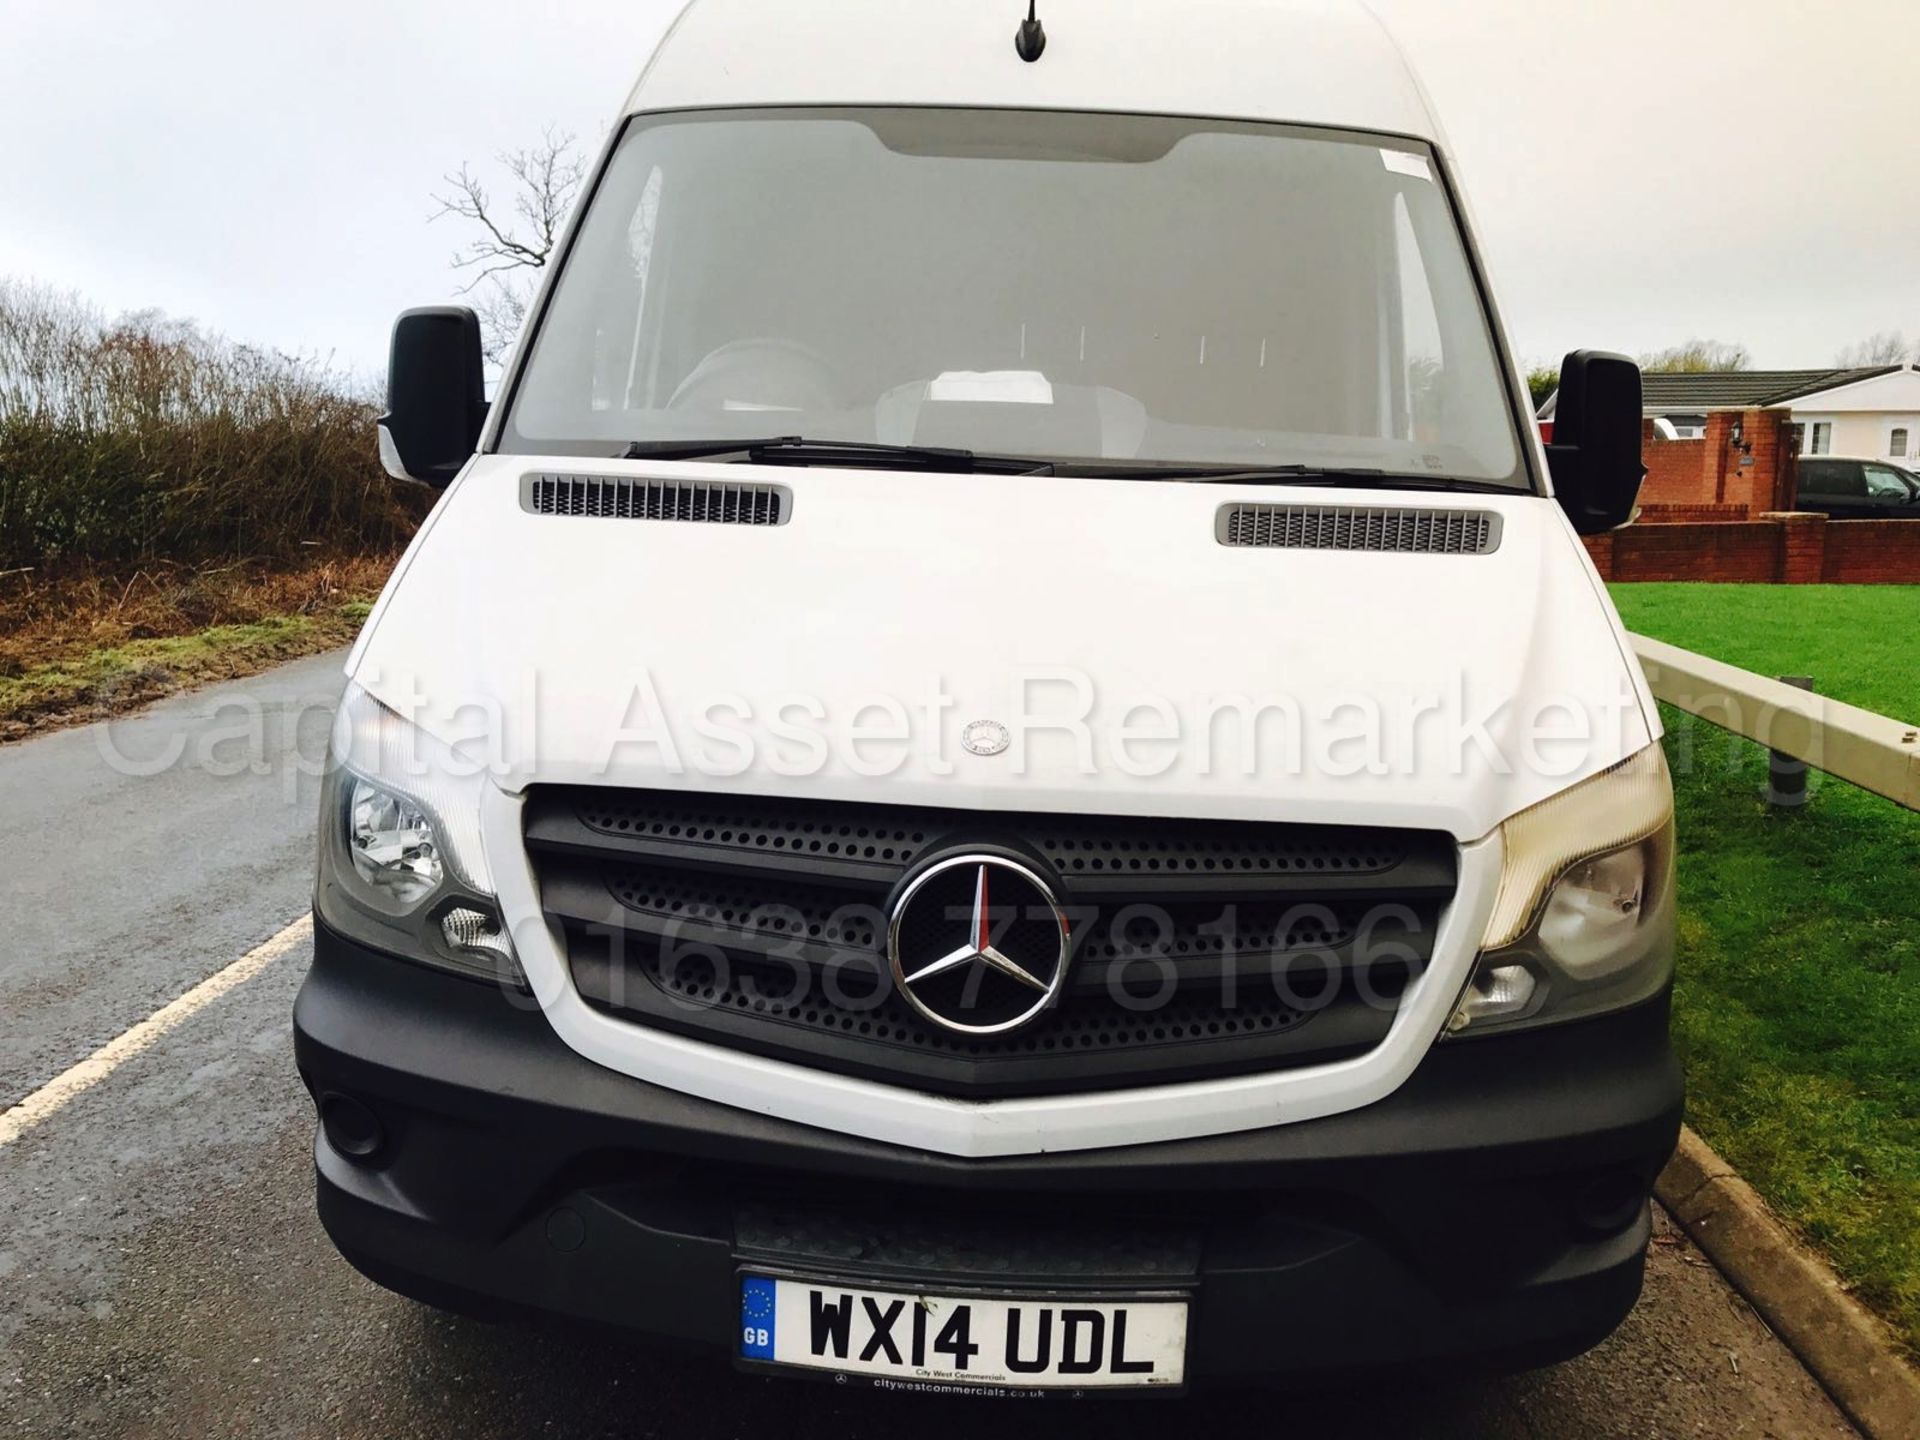 ON SALE MERCEDES SPRINTER 313CDI "LWB HIGH ROOF" NEW SHAPE - 14 REG - LOW MILES - ELEC PACK - WOW!!! - Image 3 of 11